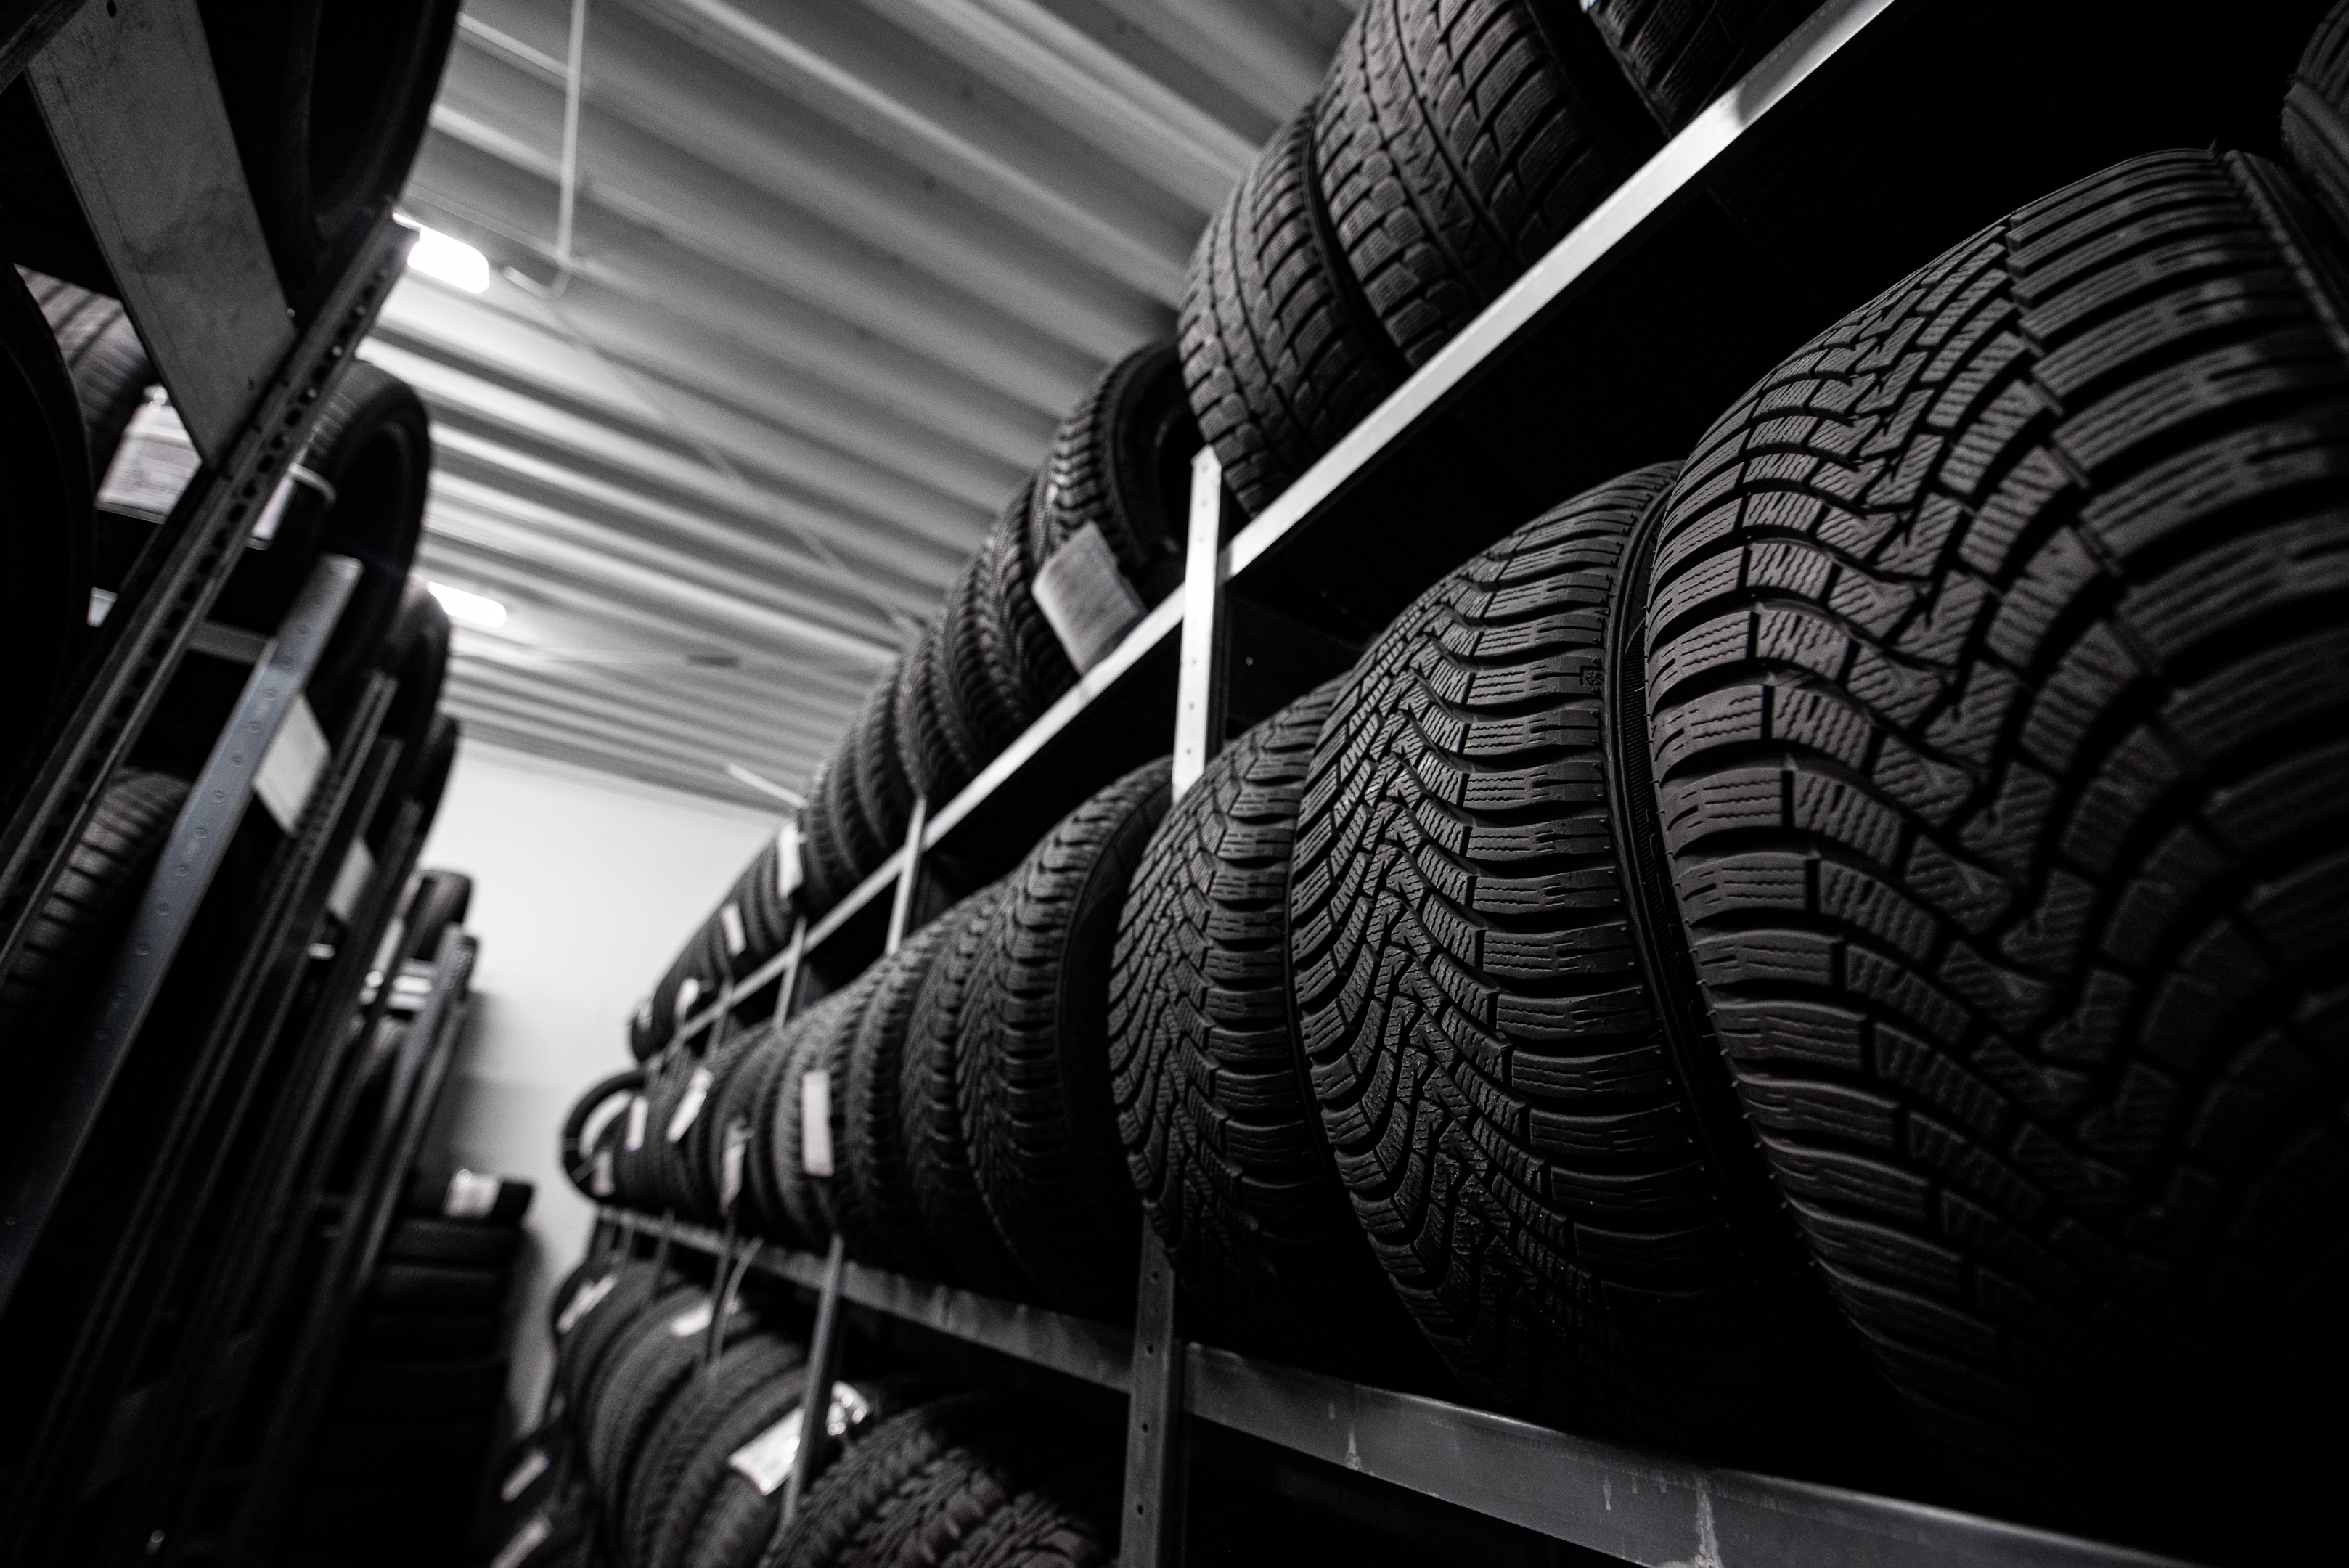 Rows of tires on a rack.